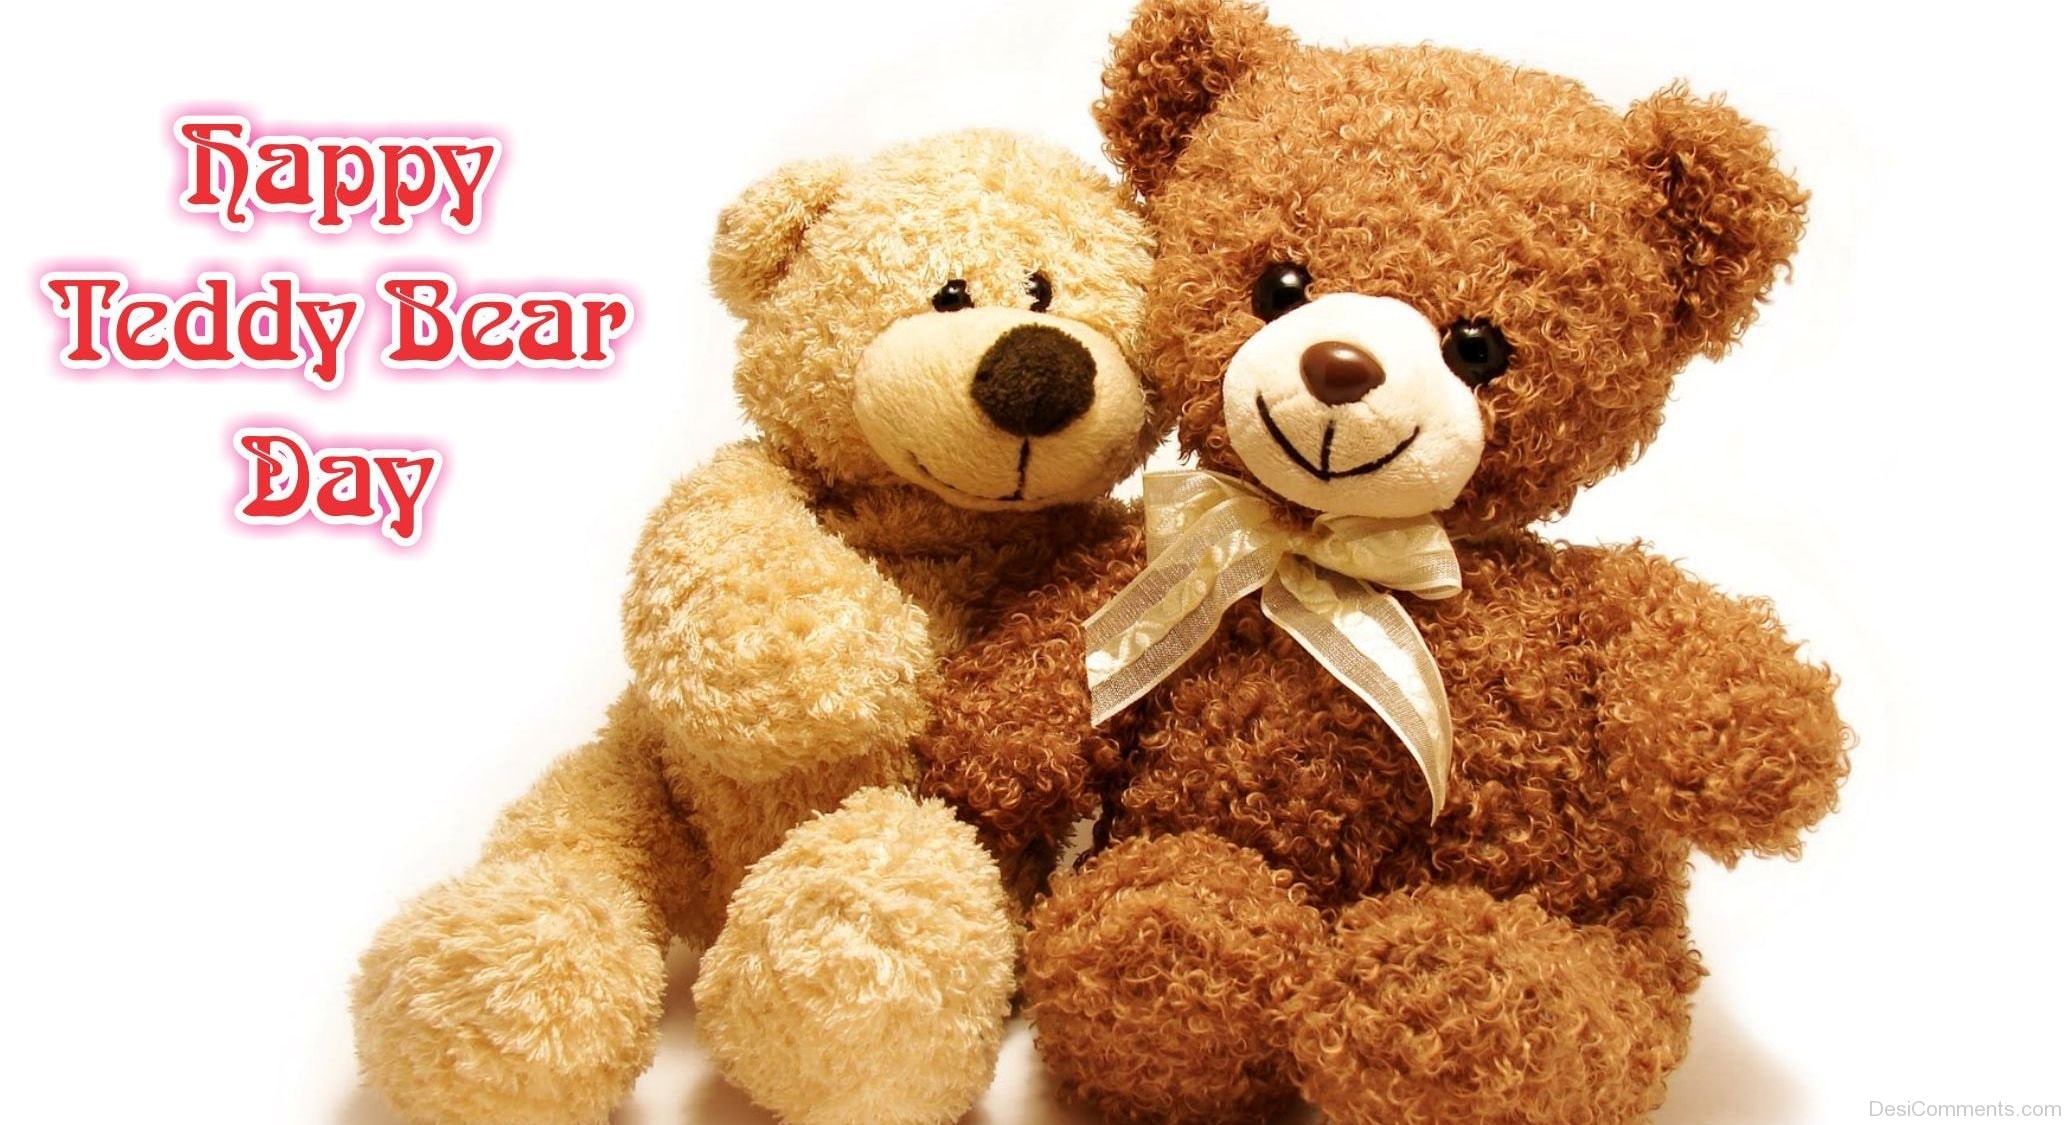 Teddy day images for girlfriend for 2018